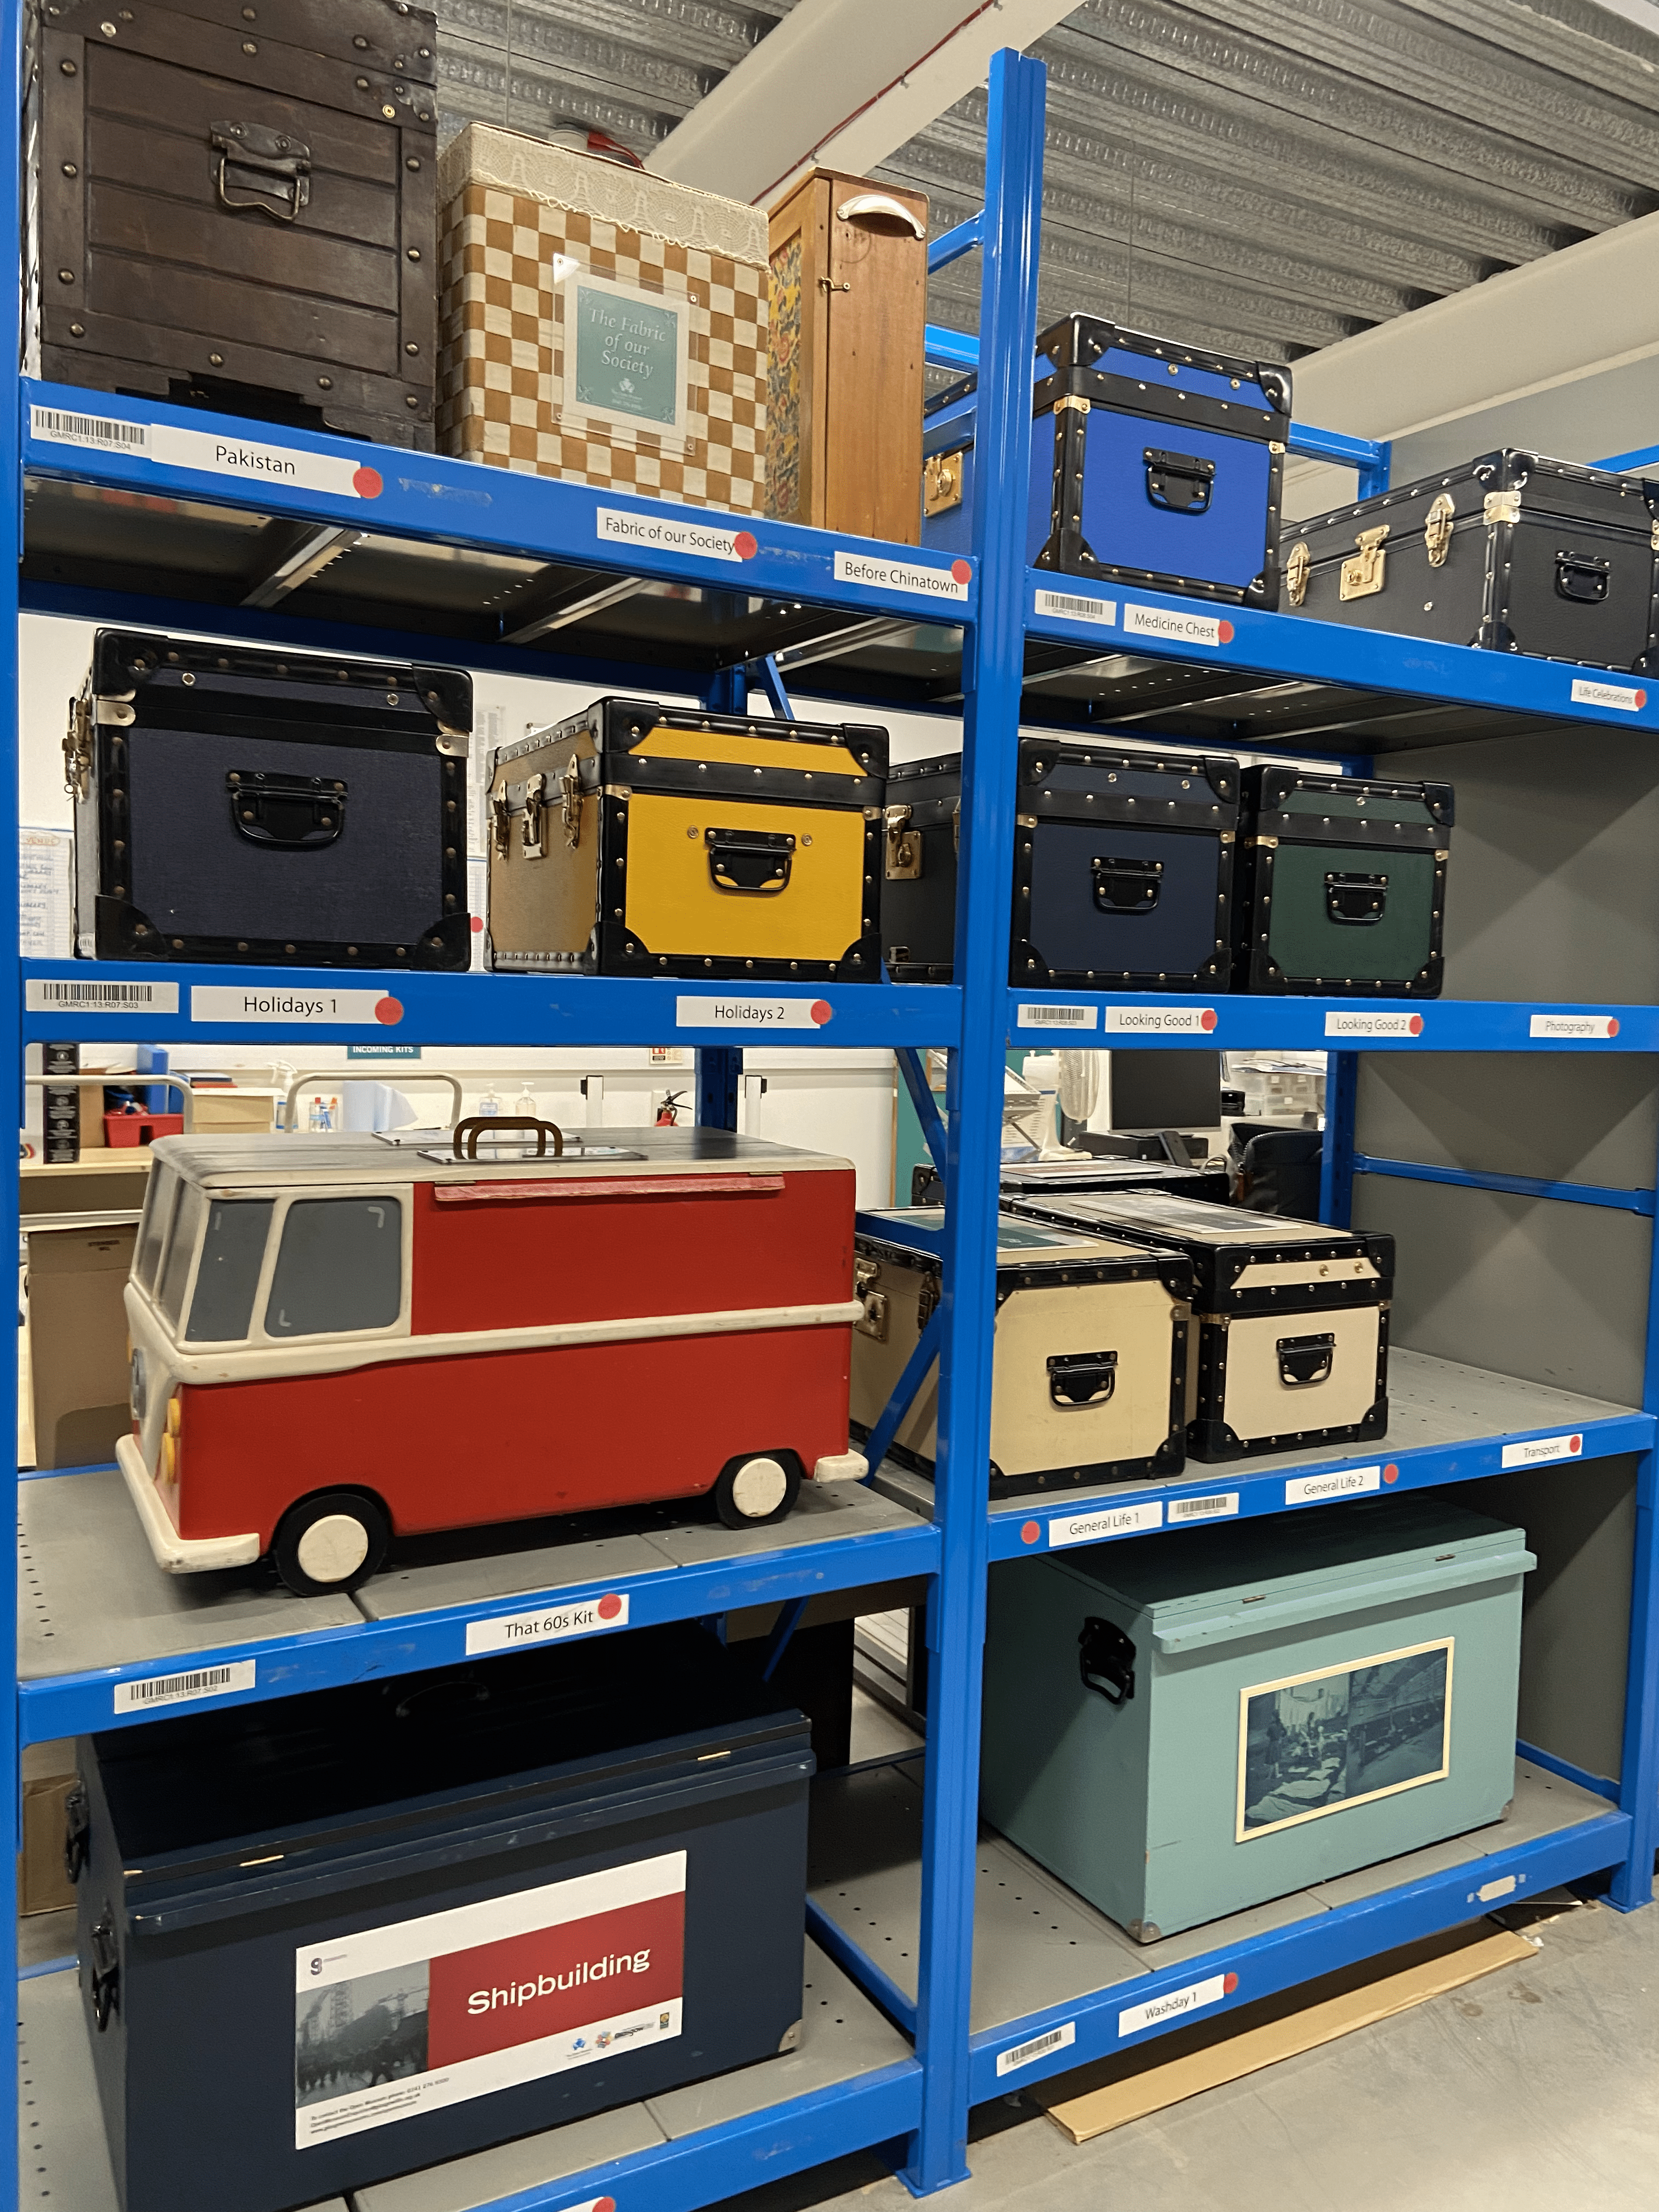 Glasgow Museums travelling exhibition kits on their shelves